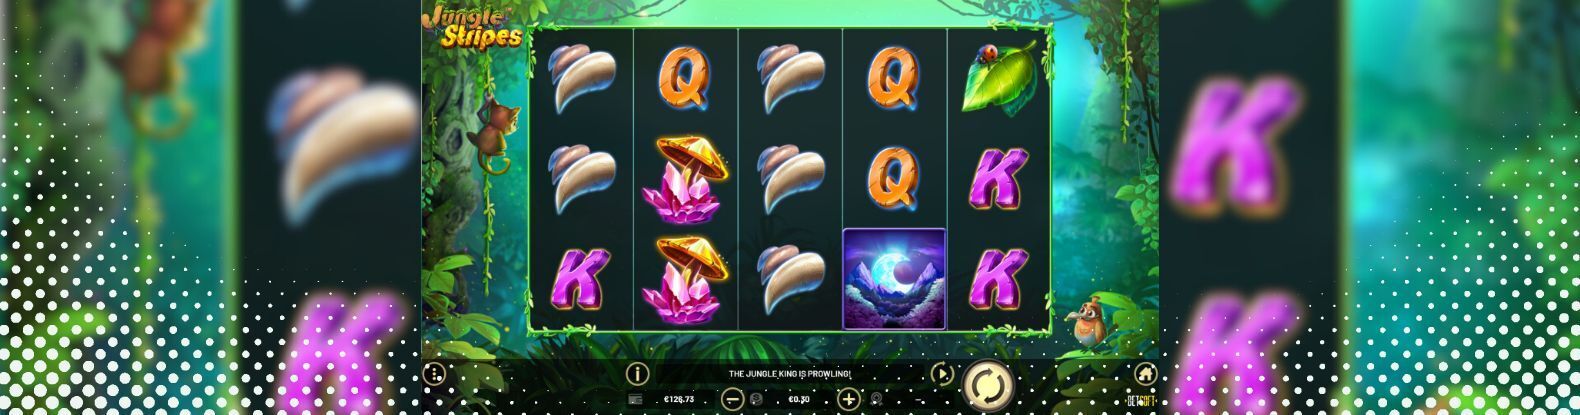 This is a pic of Jungle Stripes pokies game by Betsoft